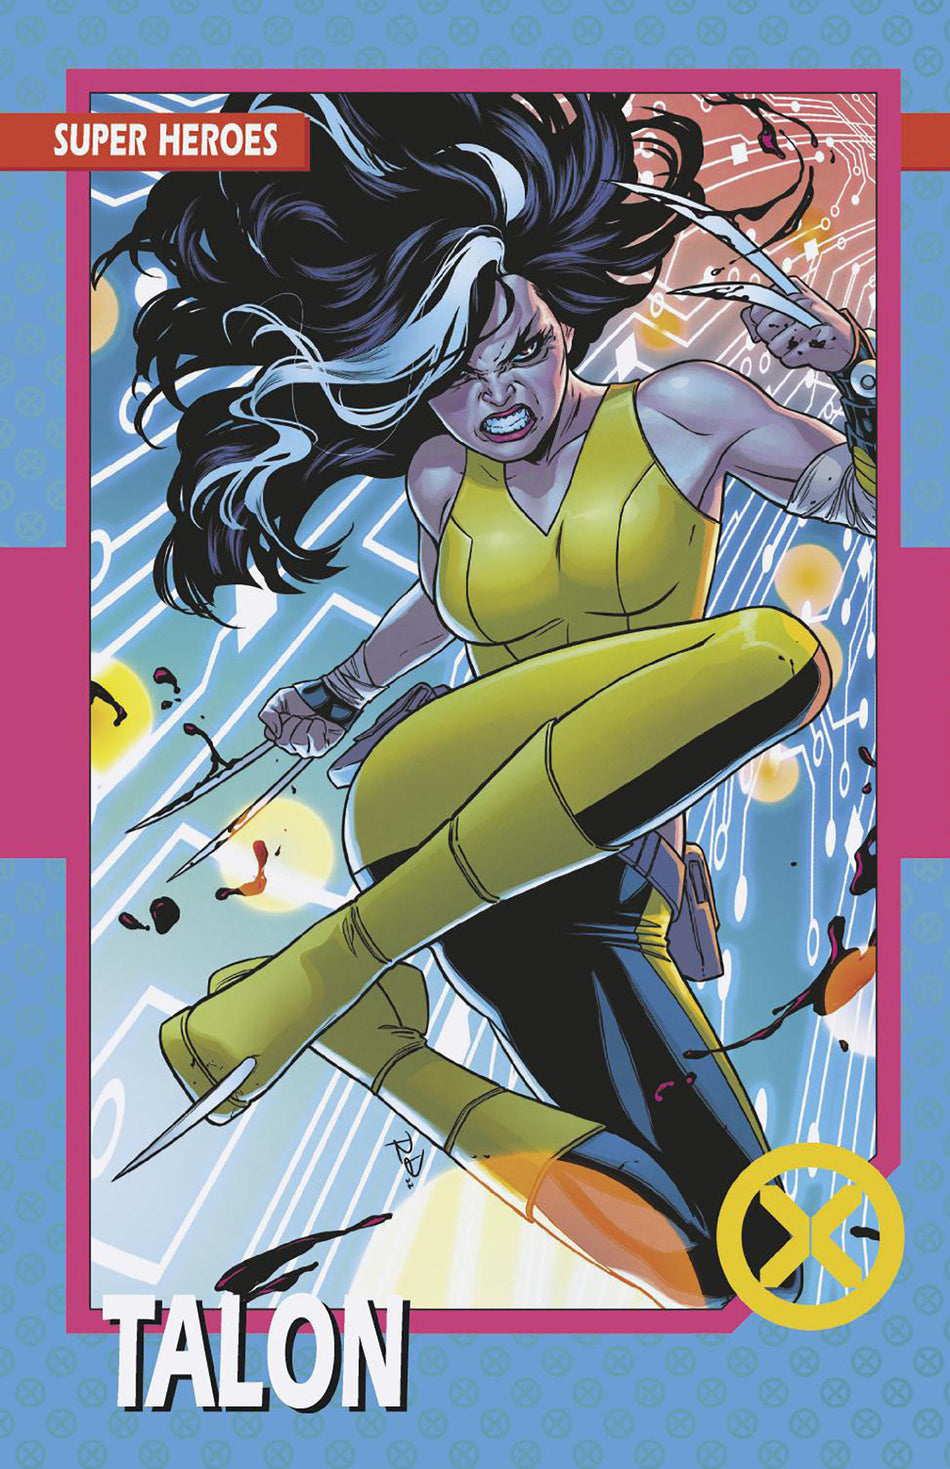 Stock photo of X-Men 24 Russell Dauterman Trading Card Variant comic sold by Stronghold Collectibles